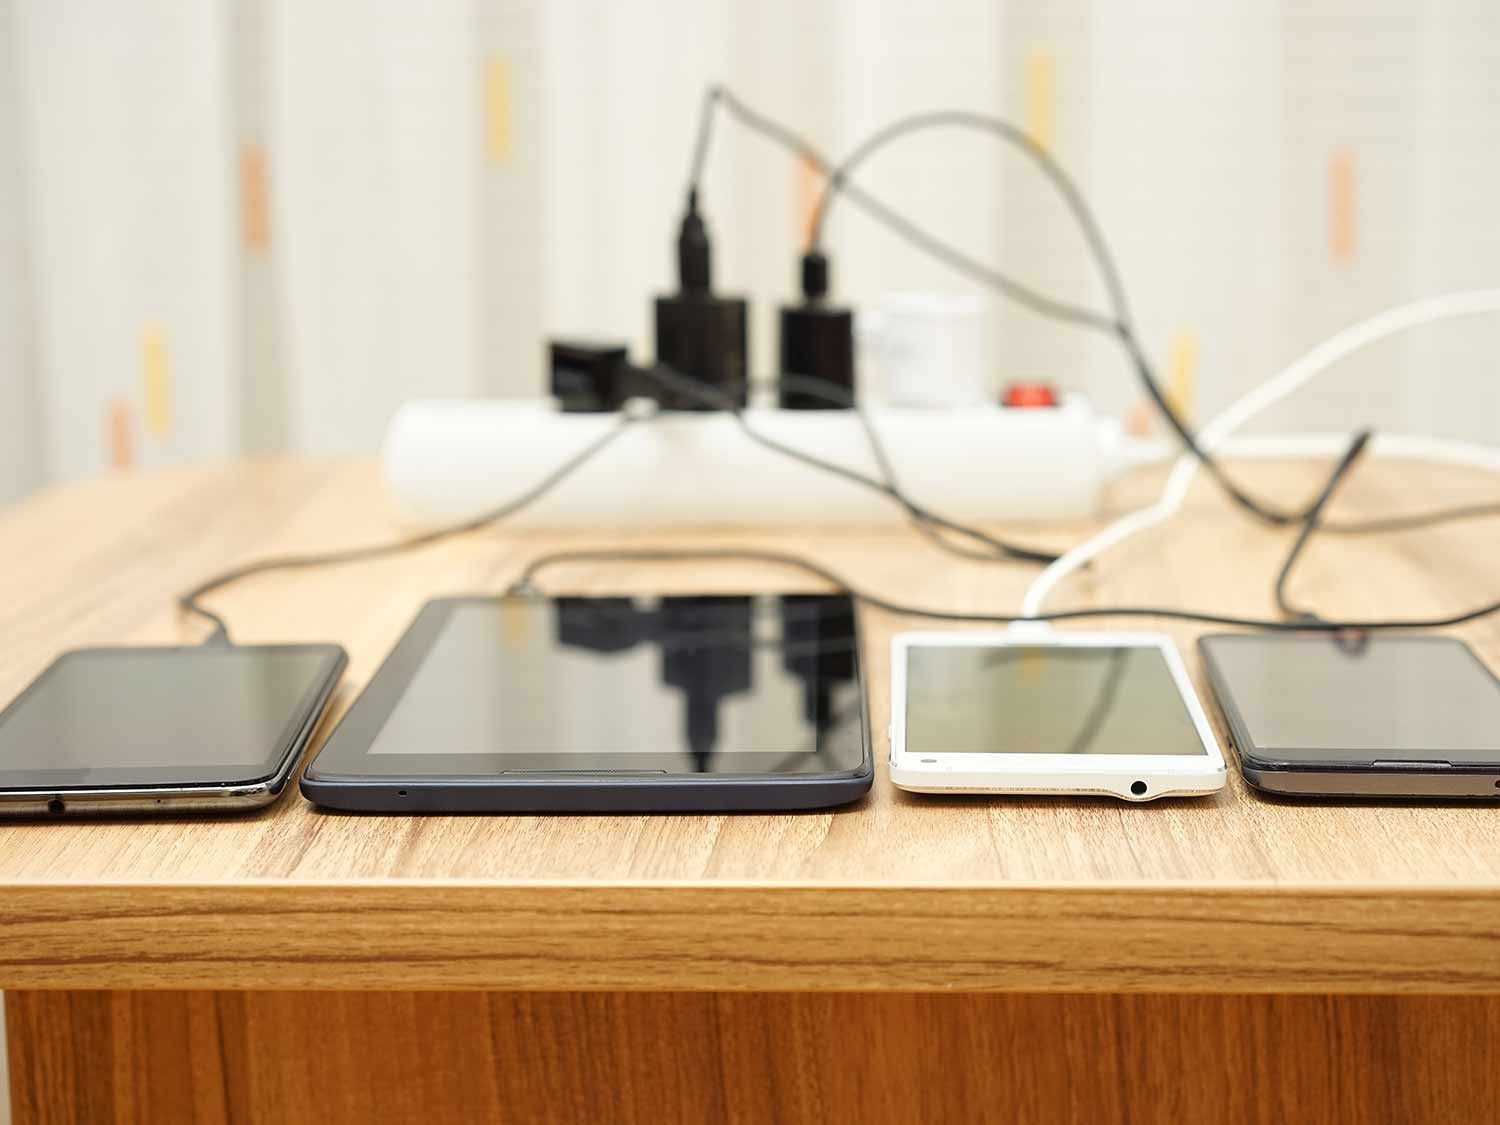 Devices plugged into a power strip.